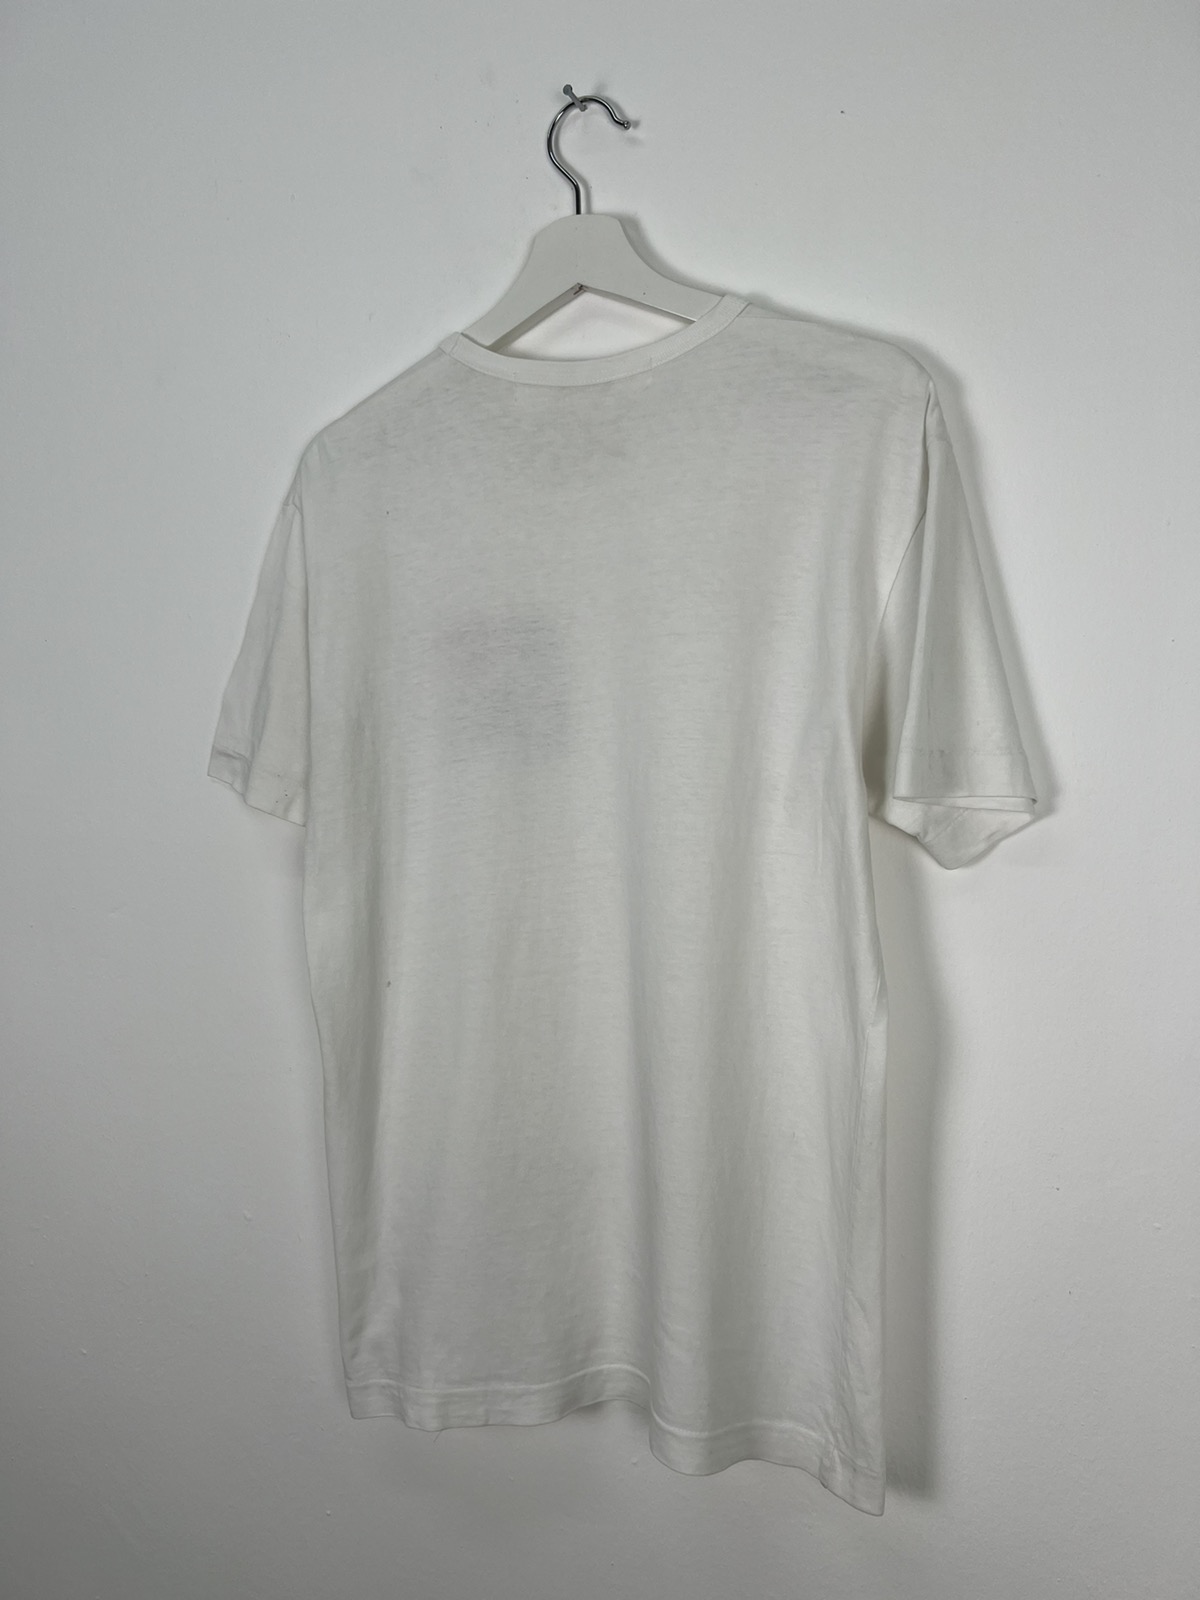 Comme des Garcons Play Tee - 9